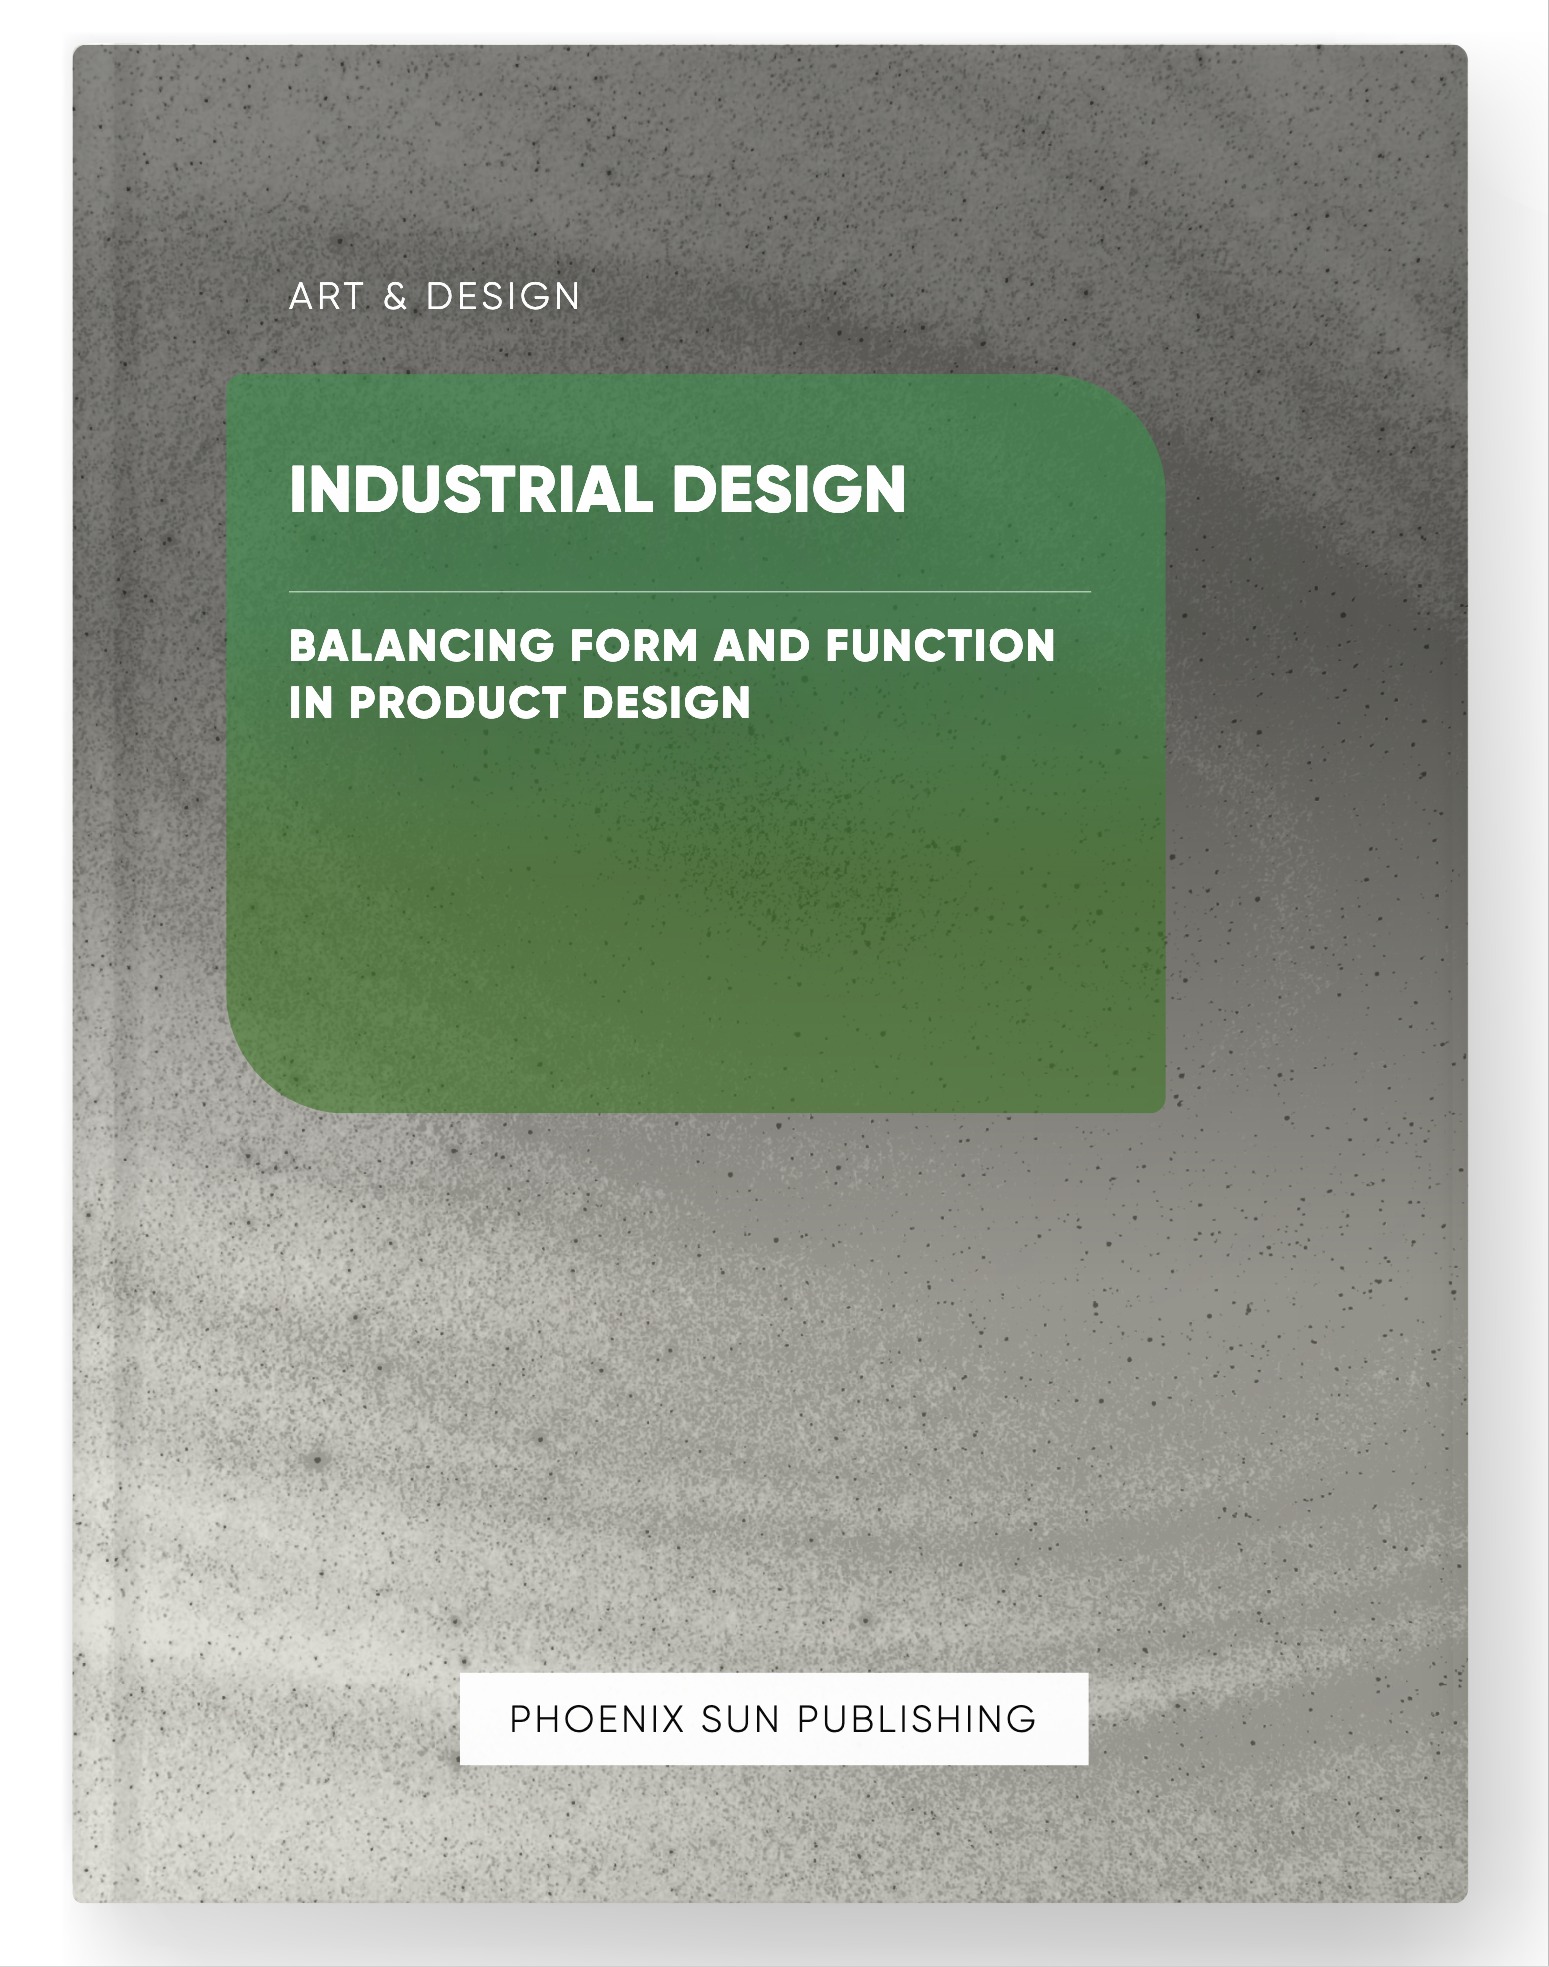 Industrial Design – Balancing Form and Function in Product Design